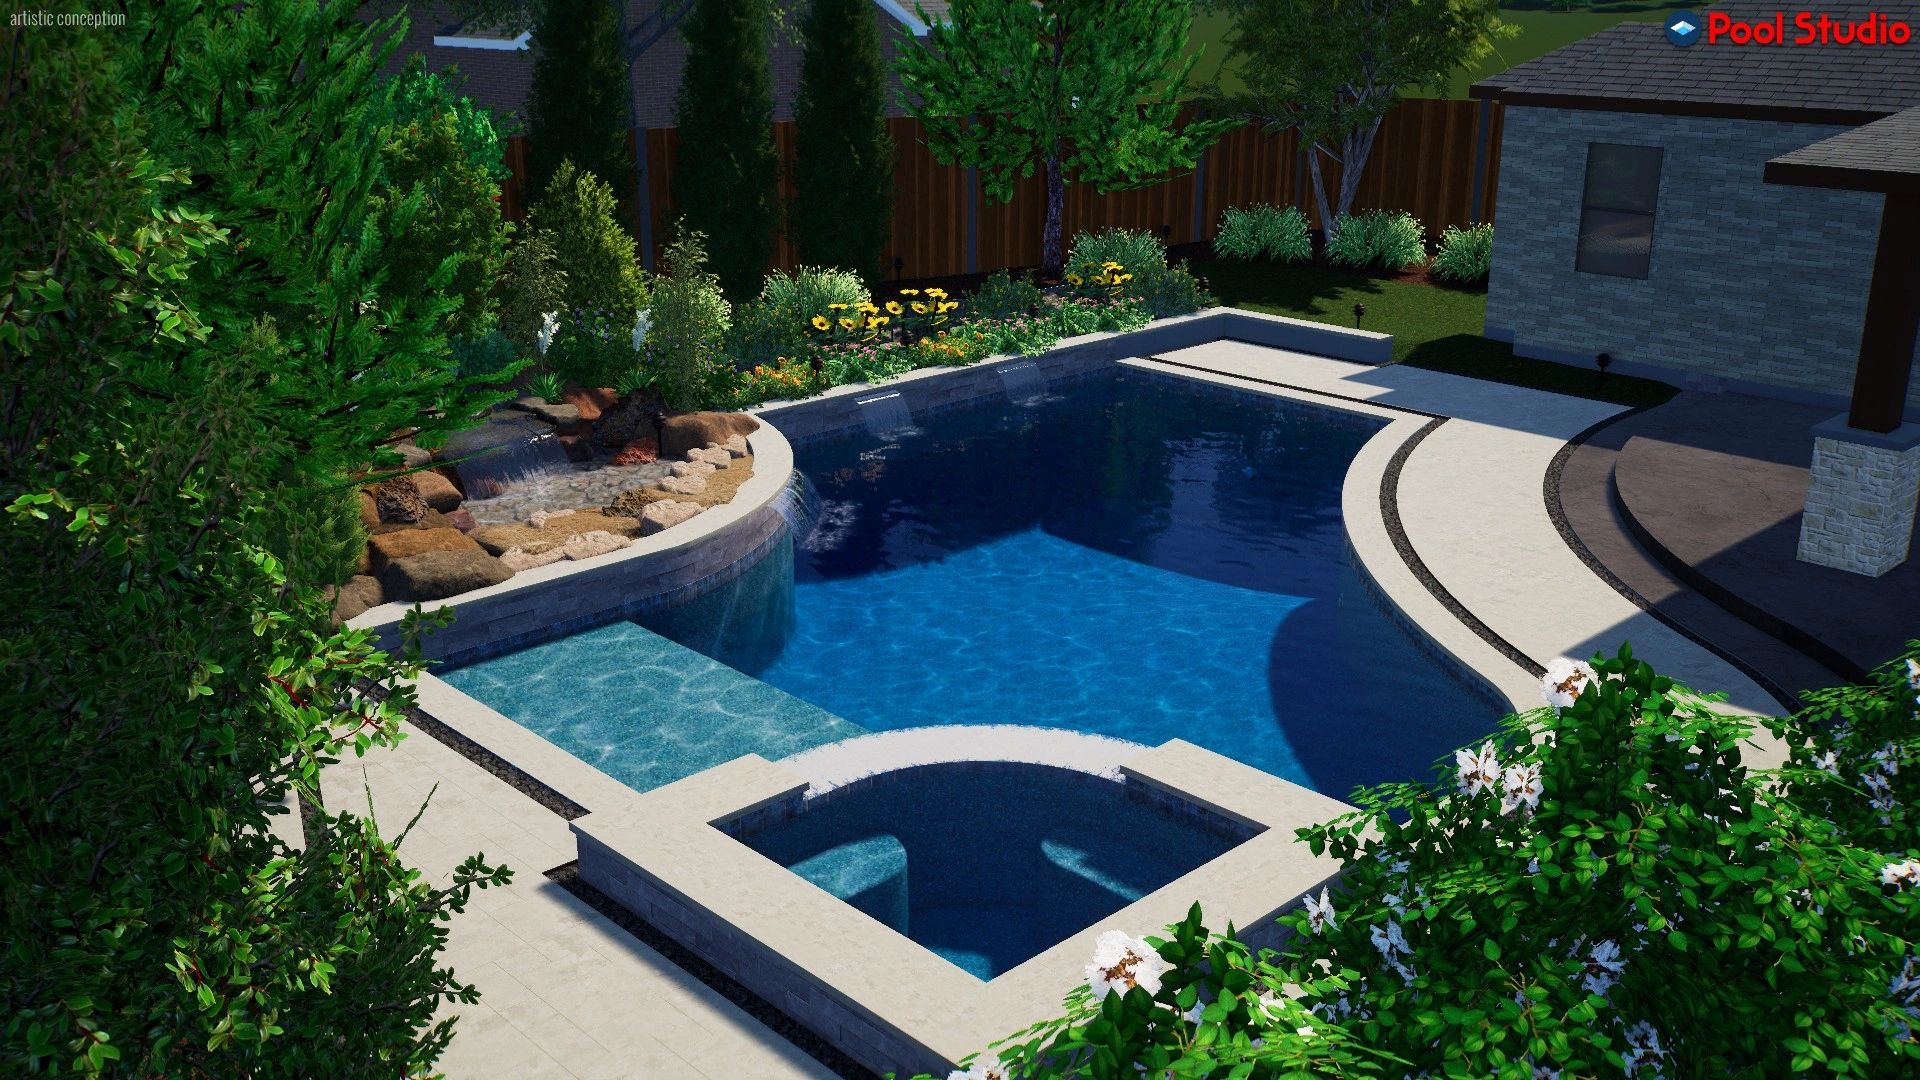 dallas richardson build a new pool 2 Plano Pool Builders and Pool Construction